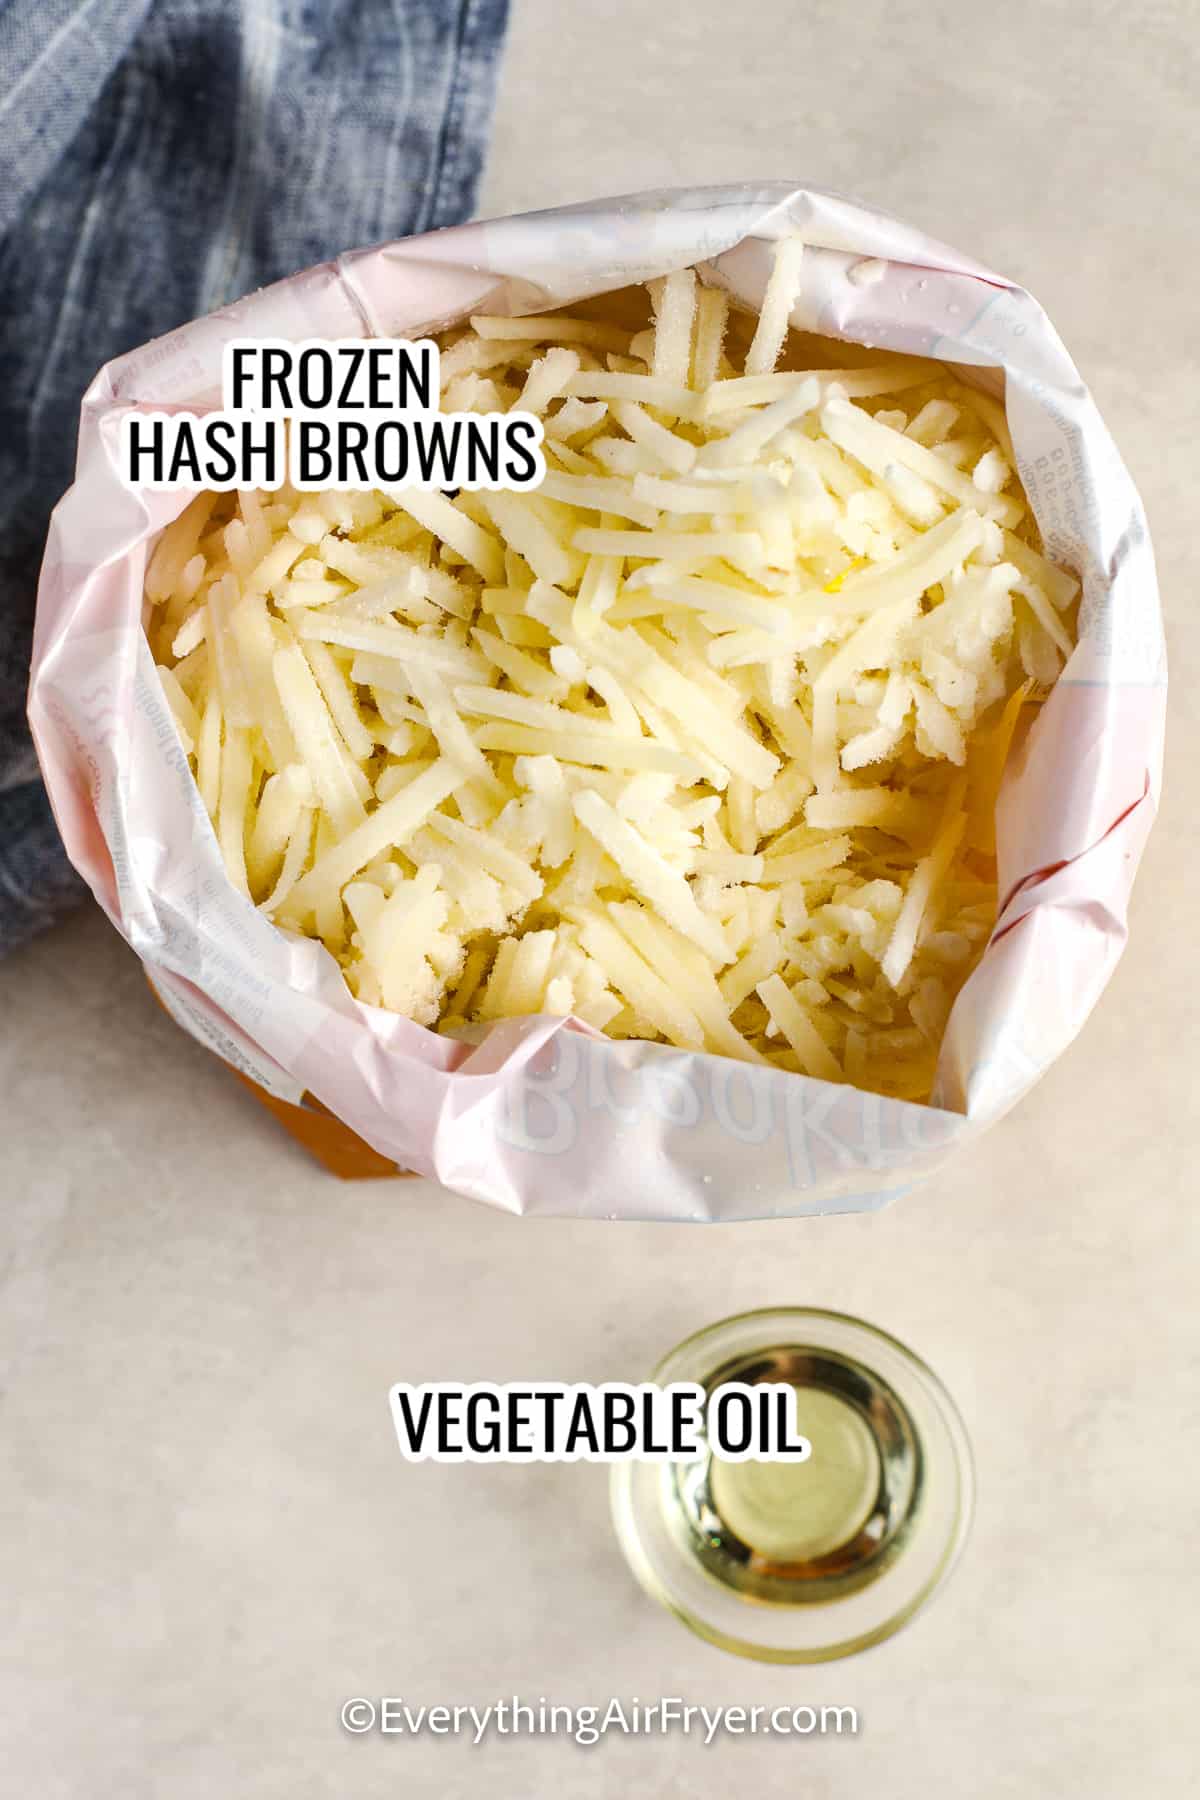 ingredients assembled to make air fryer hash browns, including frozen hash browns and vegetable oil